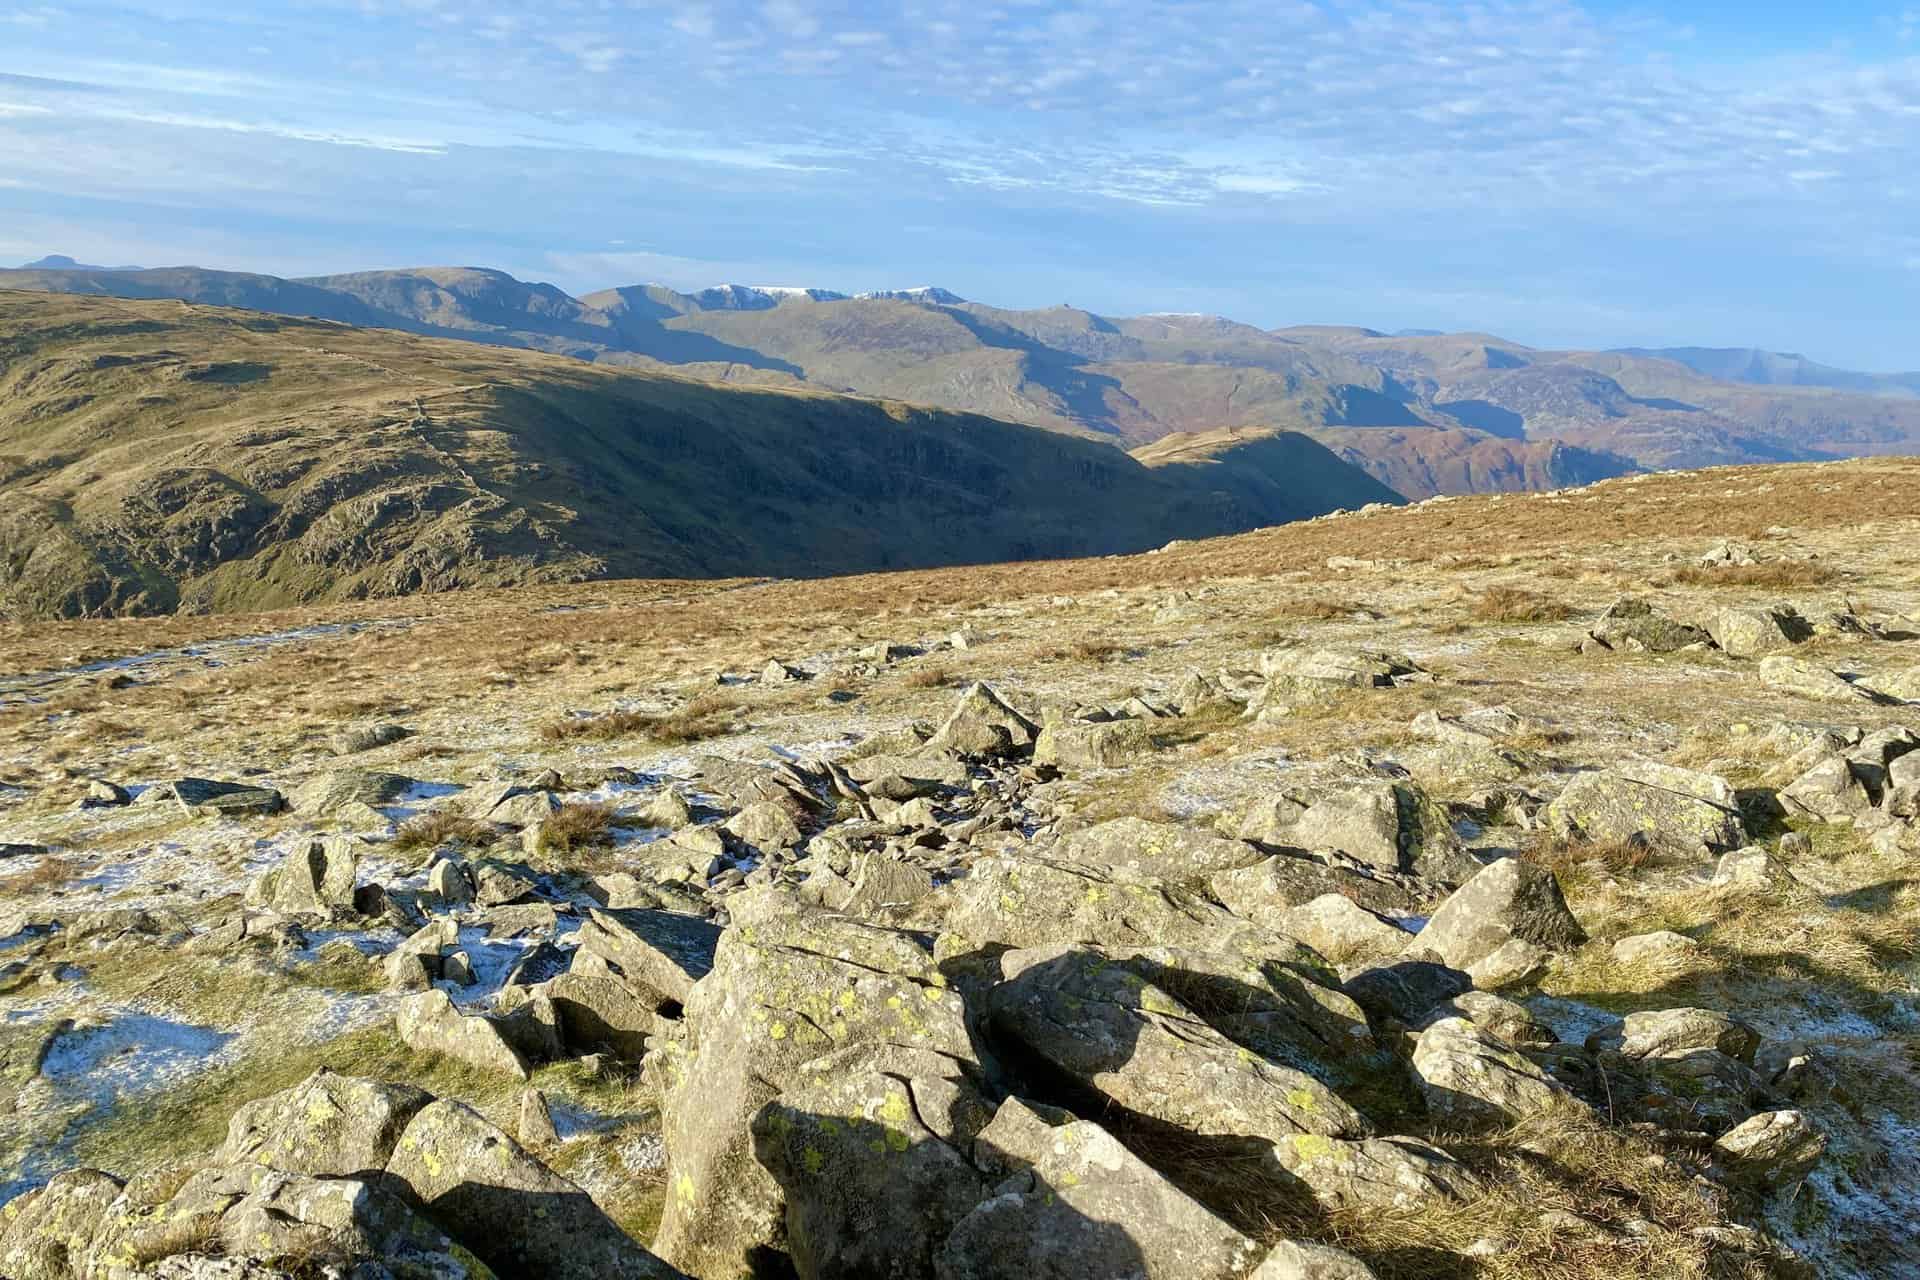 The view west from Thornthwaite Crag to the snow-covered tops of Helvellyn and Nethermost Pike on the horizon.